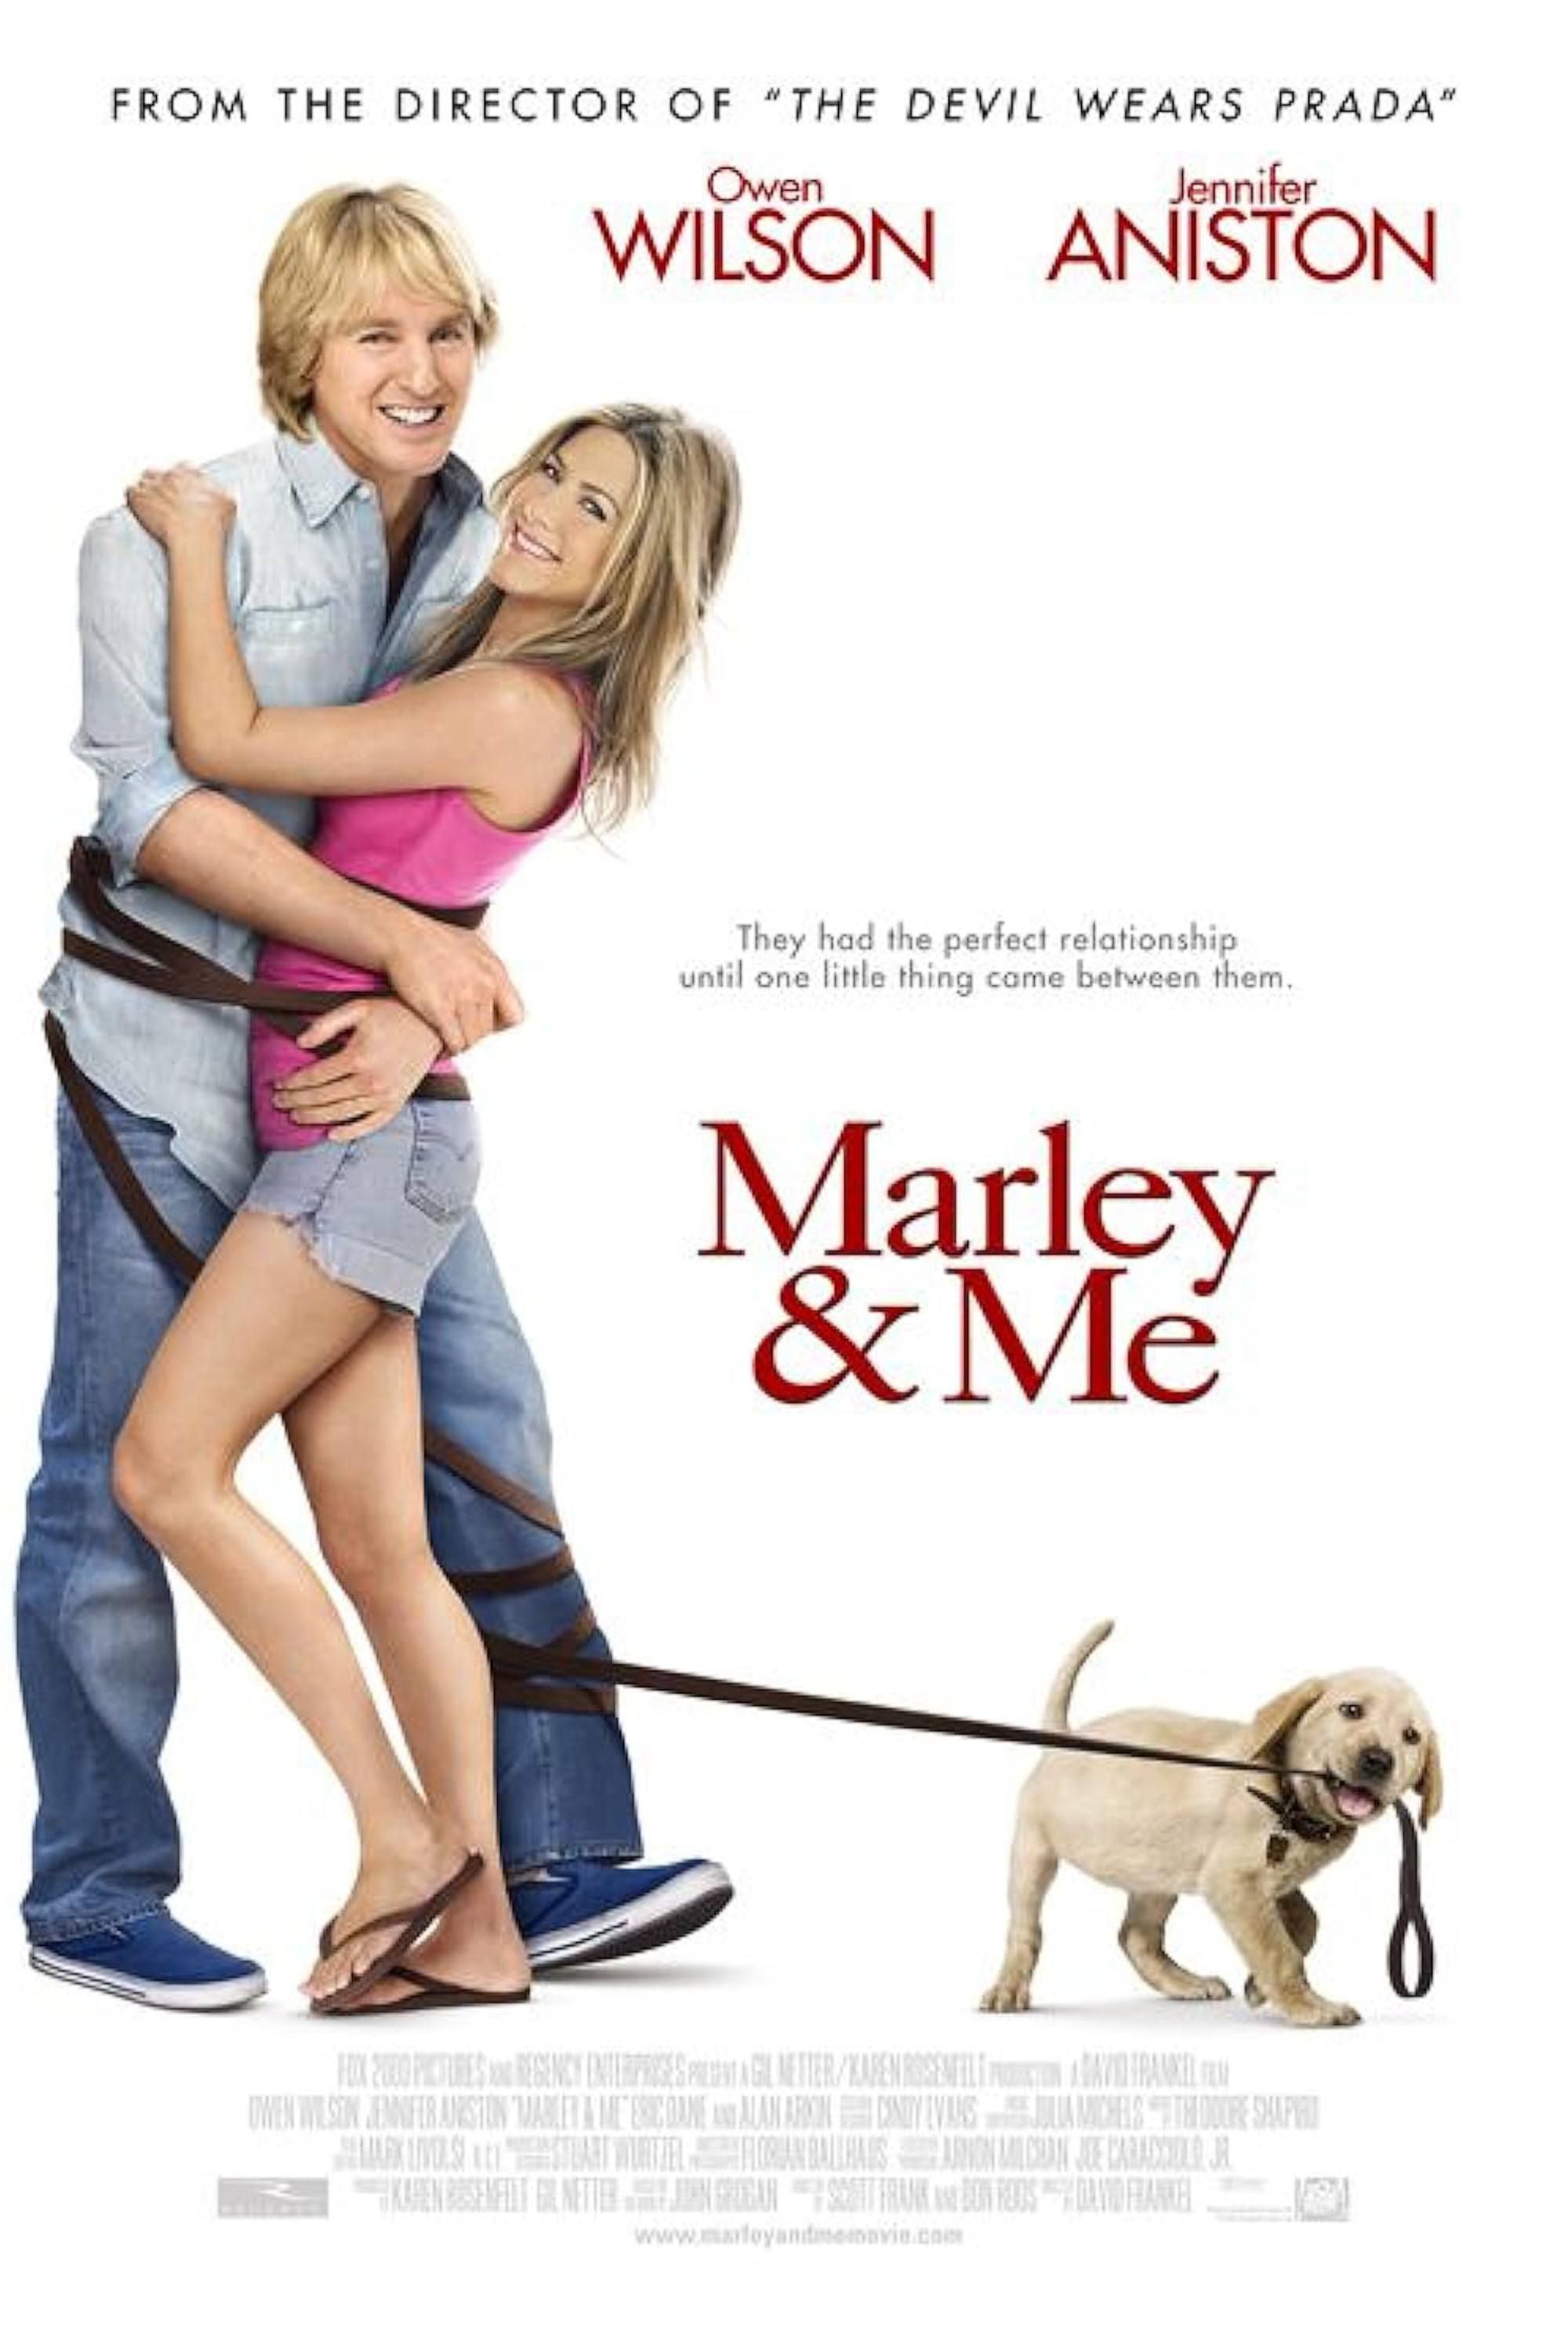 Marley & Me (2008) - Poster - Owen Wilson & Jennifer Aniston Hugging each other with a dog